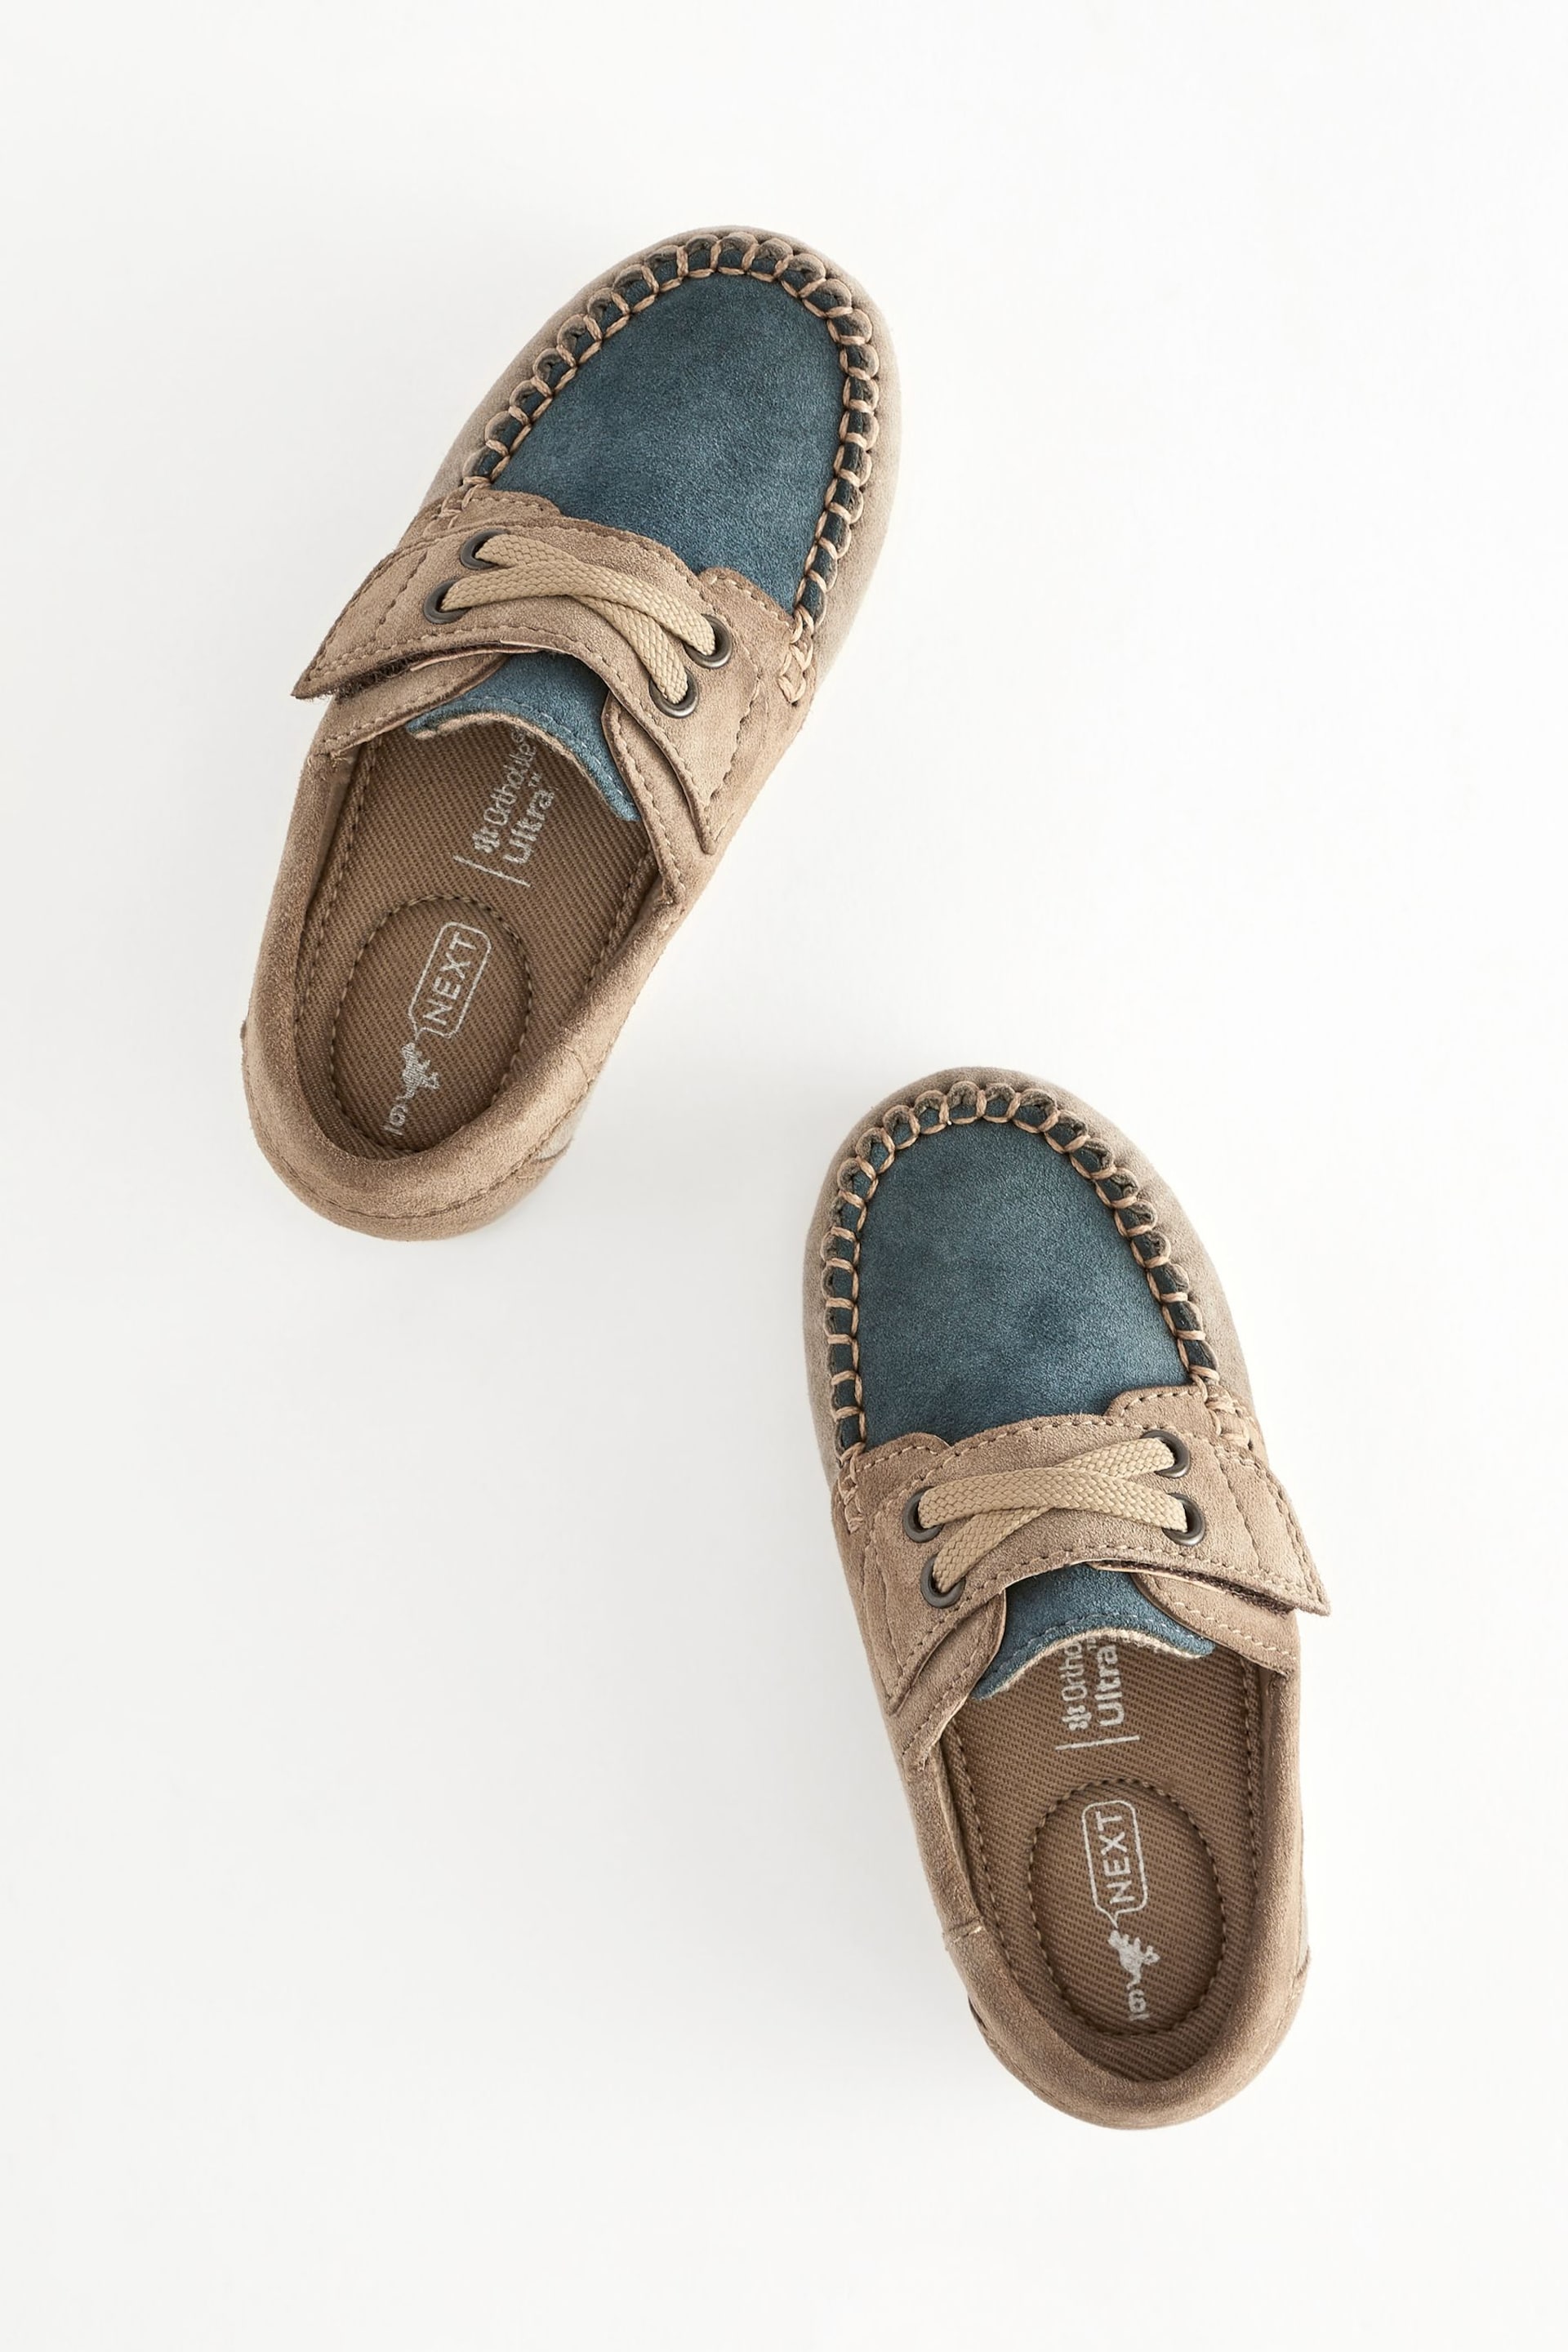 Stone/Mineral Blue Leather Boat Shoes - Image 5 of 5